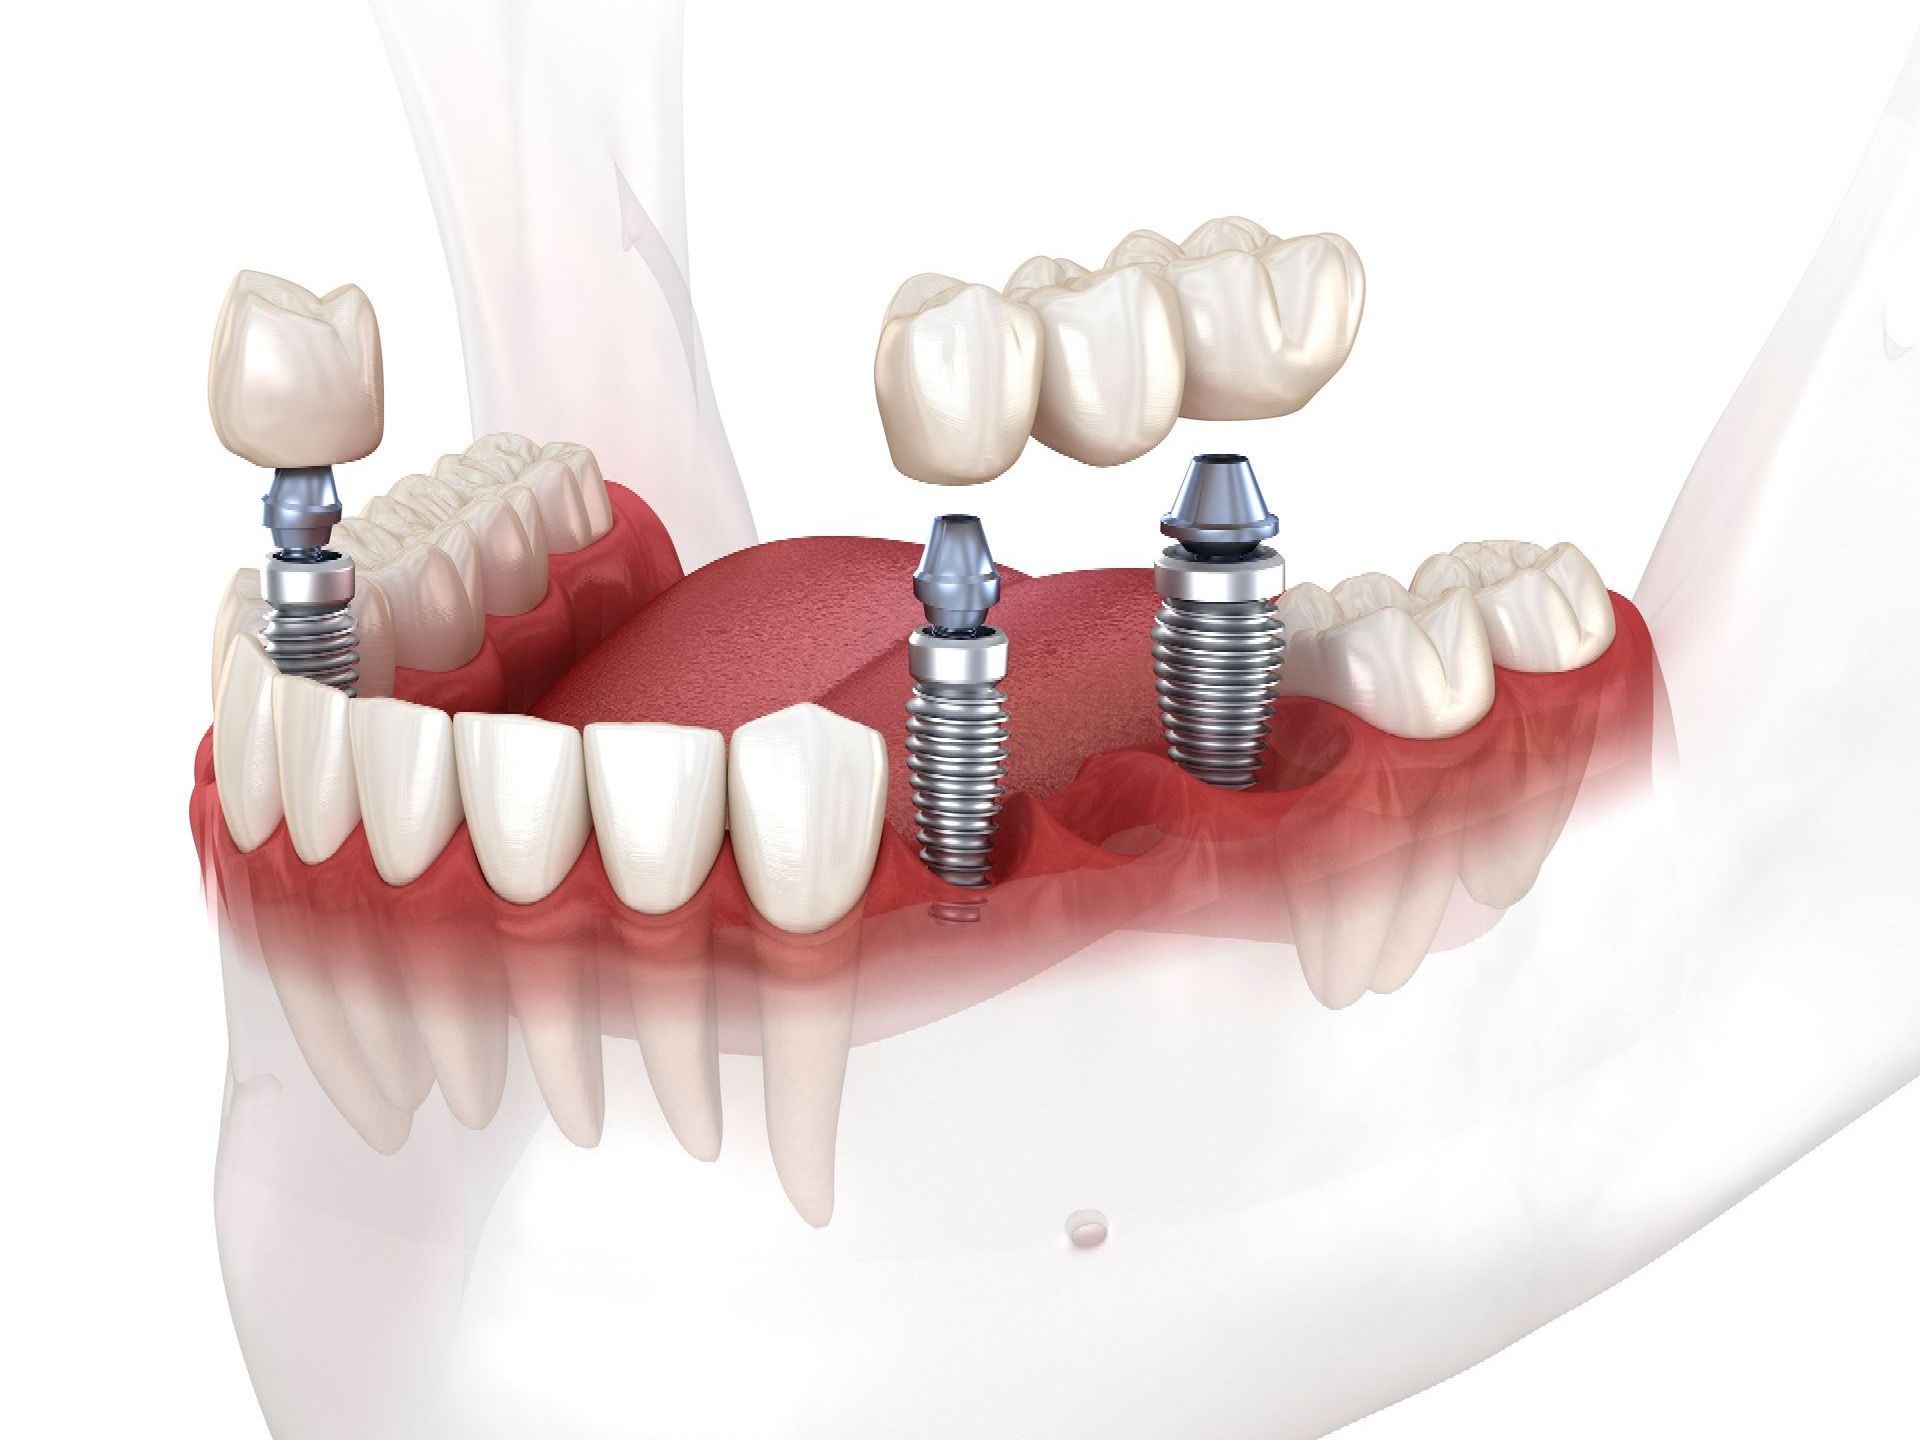 A computer generated image showing multiple teeth being replaced with implants